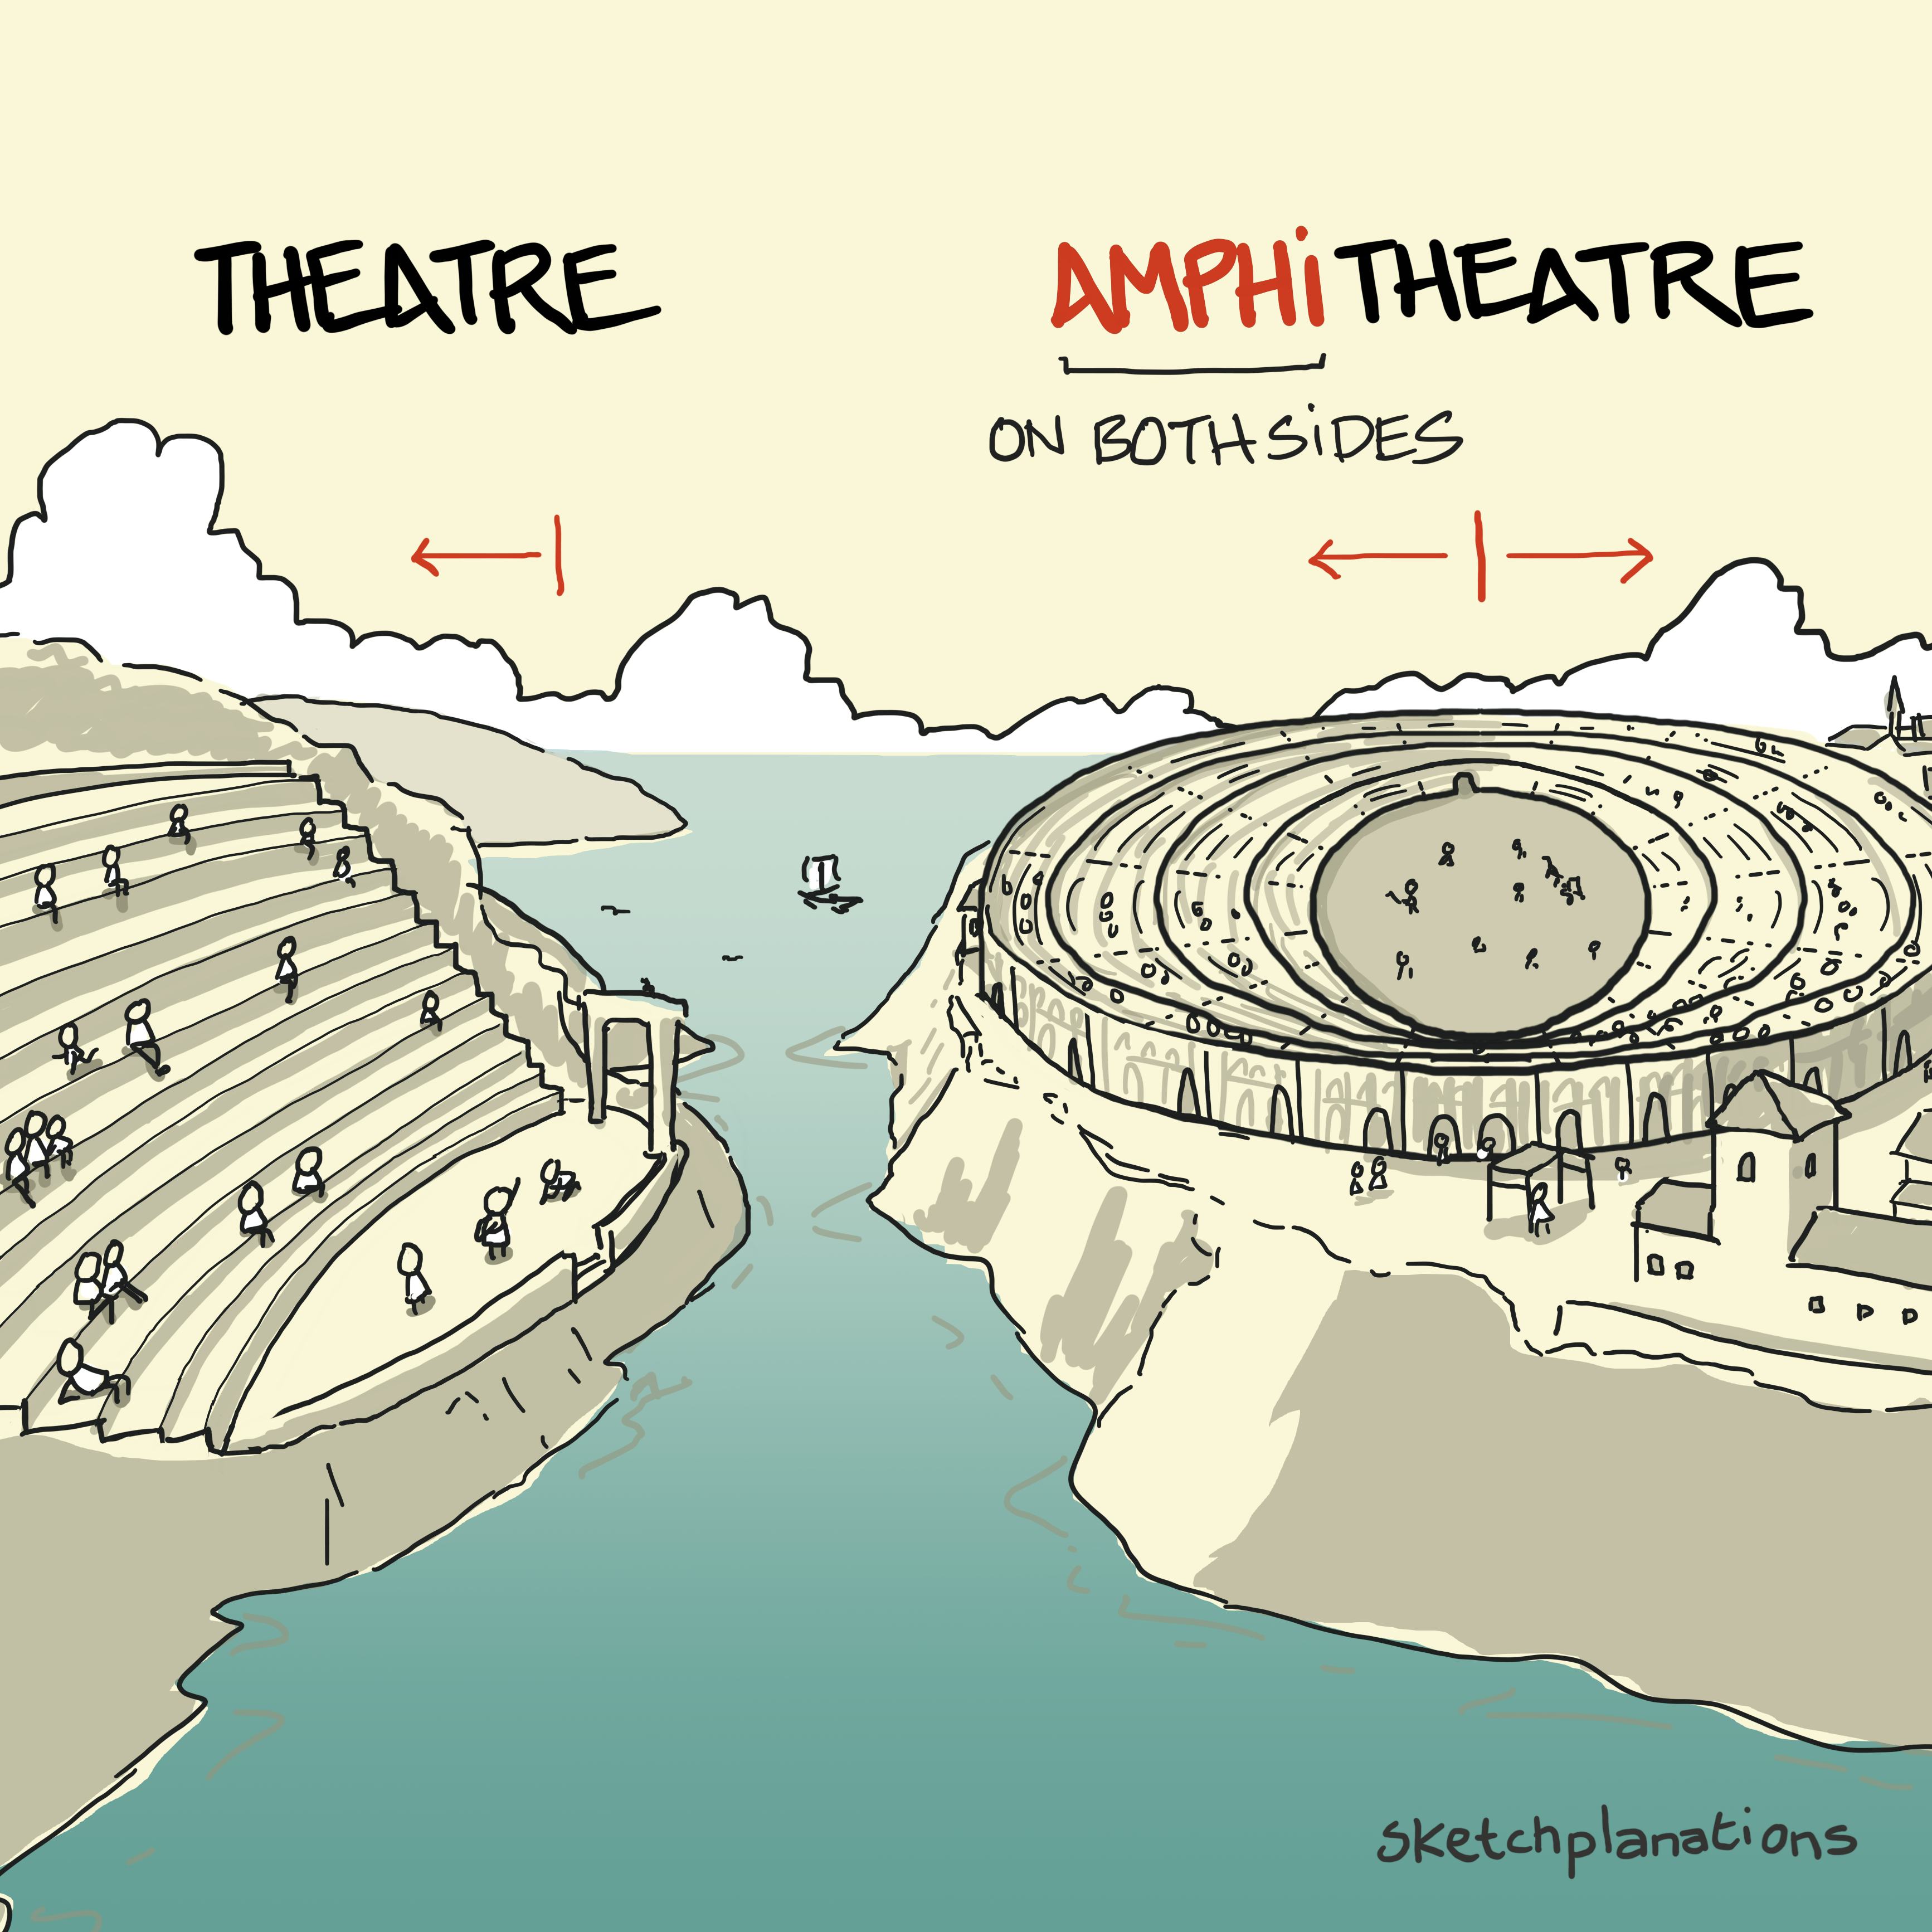 Amphitheatre and theatre (or amphitheater and theatre): an open theatre like the Minack theatre is shown on the coast on the left, contrasted with a larger amphitheatre with seating on both sides (or all the way round) on the land on the right.